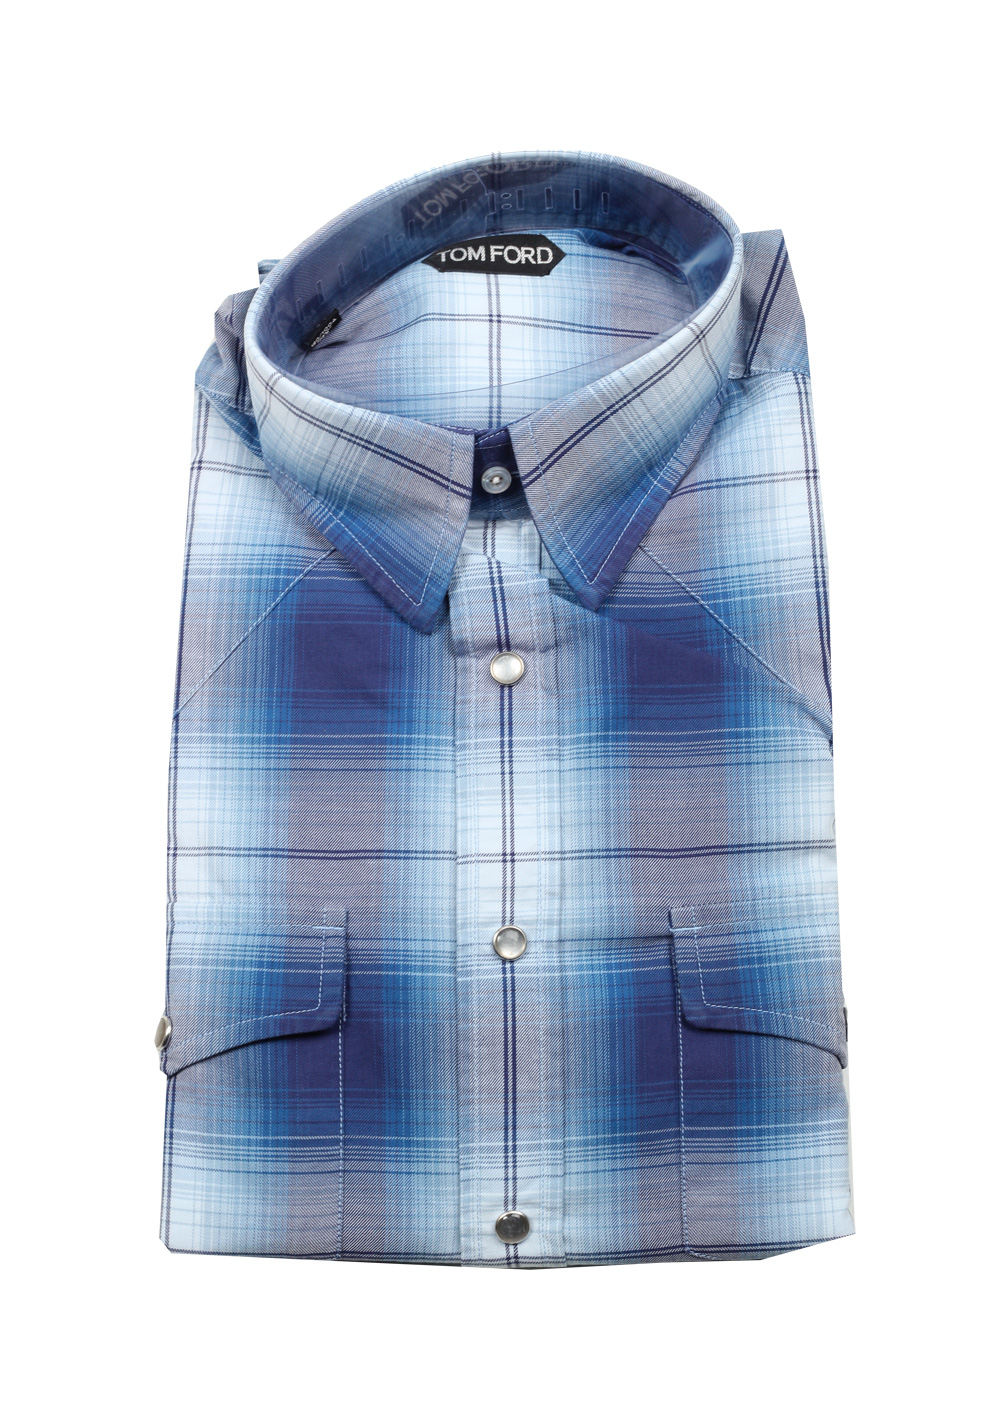 TOM FORD Checked Blue Casual Shirt Size 42 / 16,5 U.S. | Costume Limité